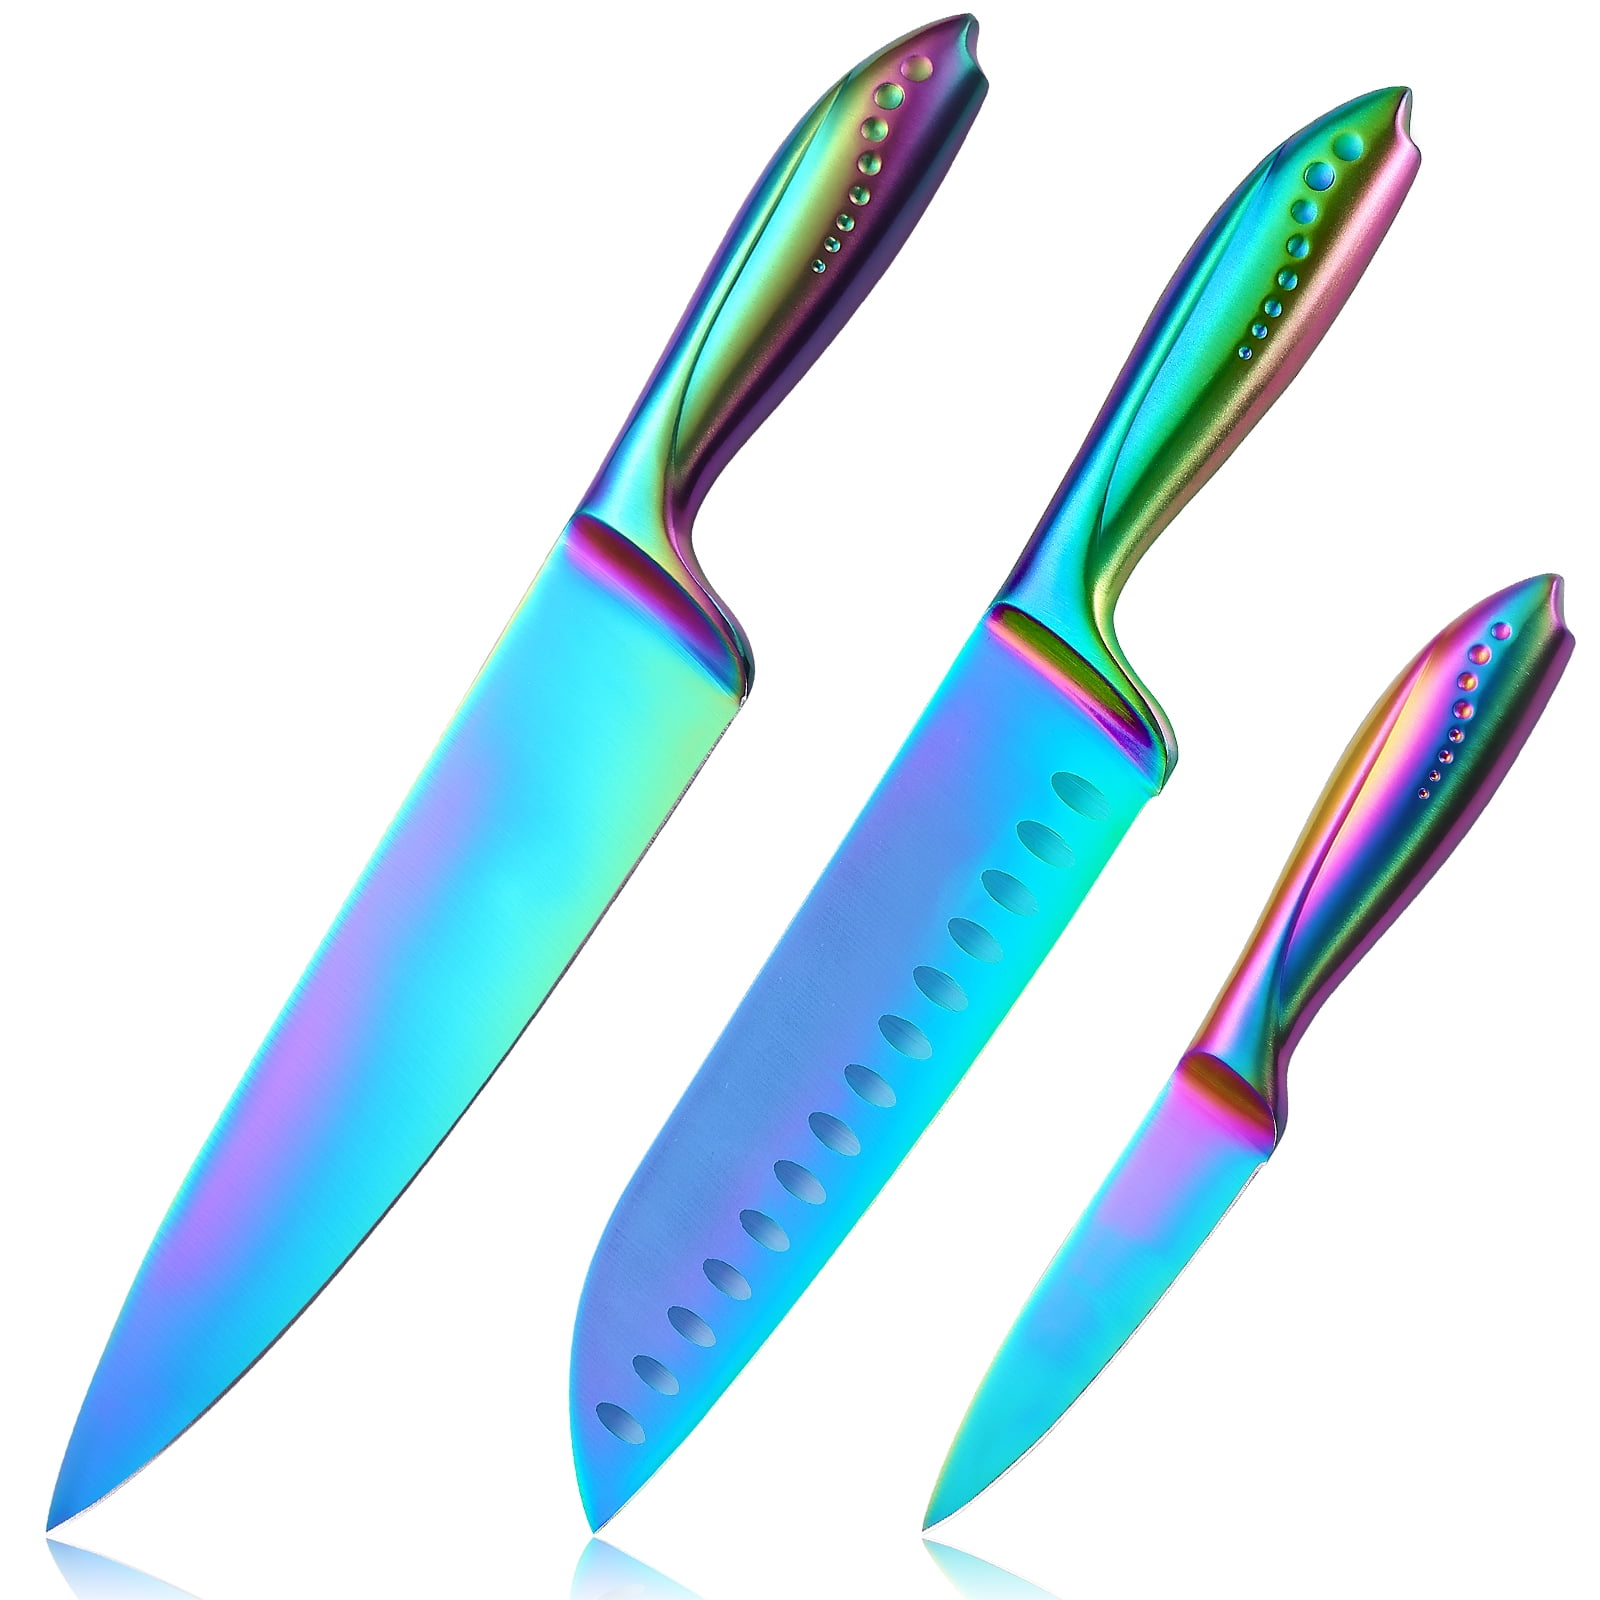 WELLSTAR Rainbow Kitchen Knives 9 Pieces Set, Chef Santoku Paring Knives  and 6 Piece Serrated Steak Knives, Iridescent Titanium Coating Stainless